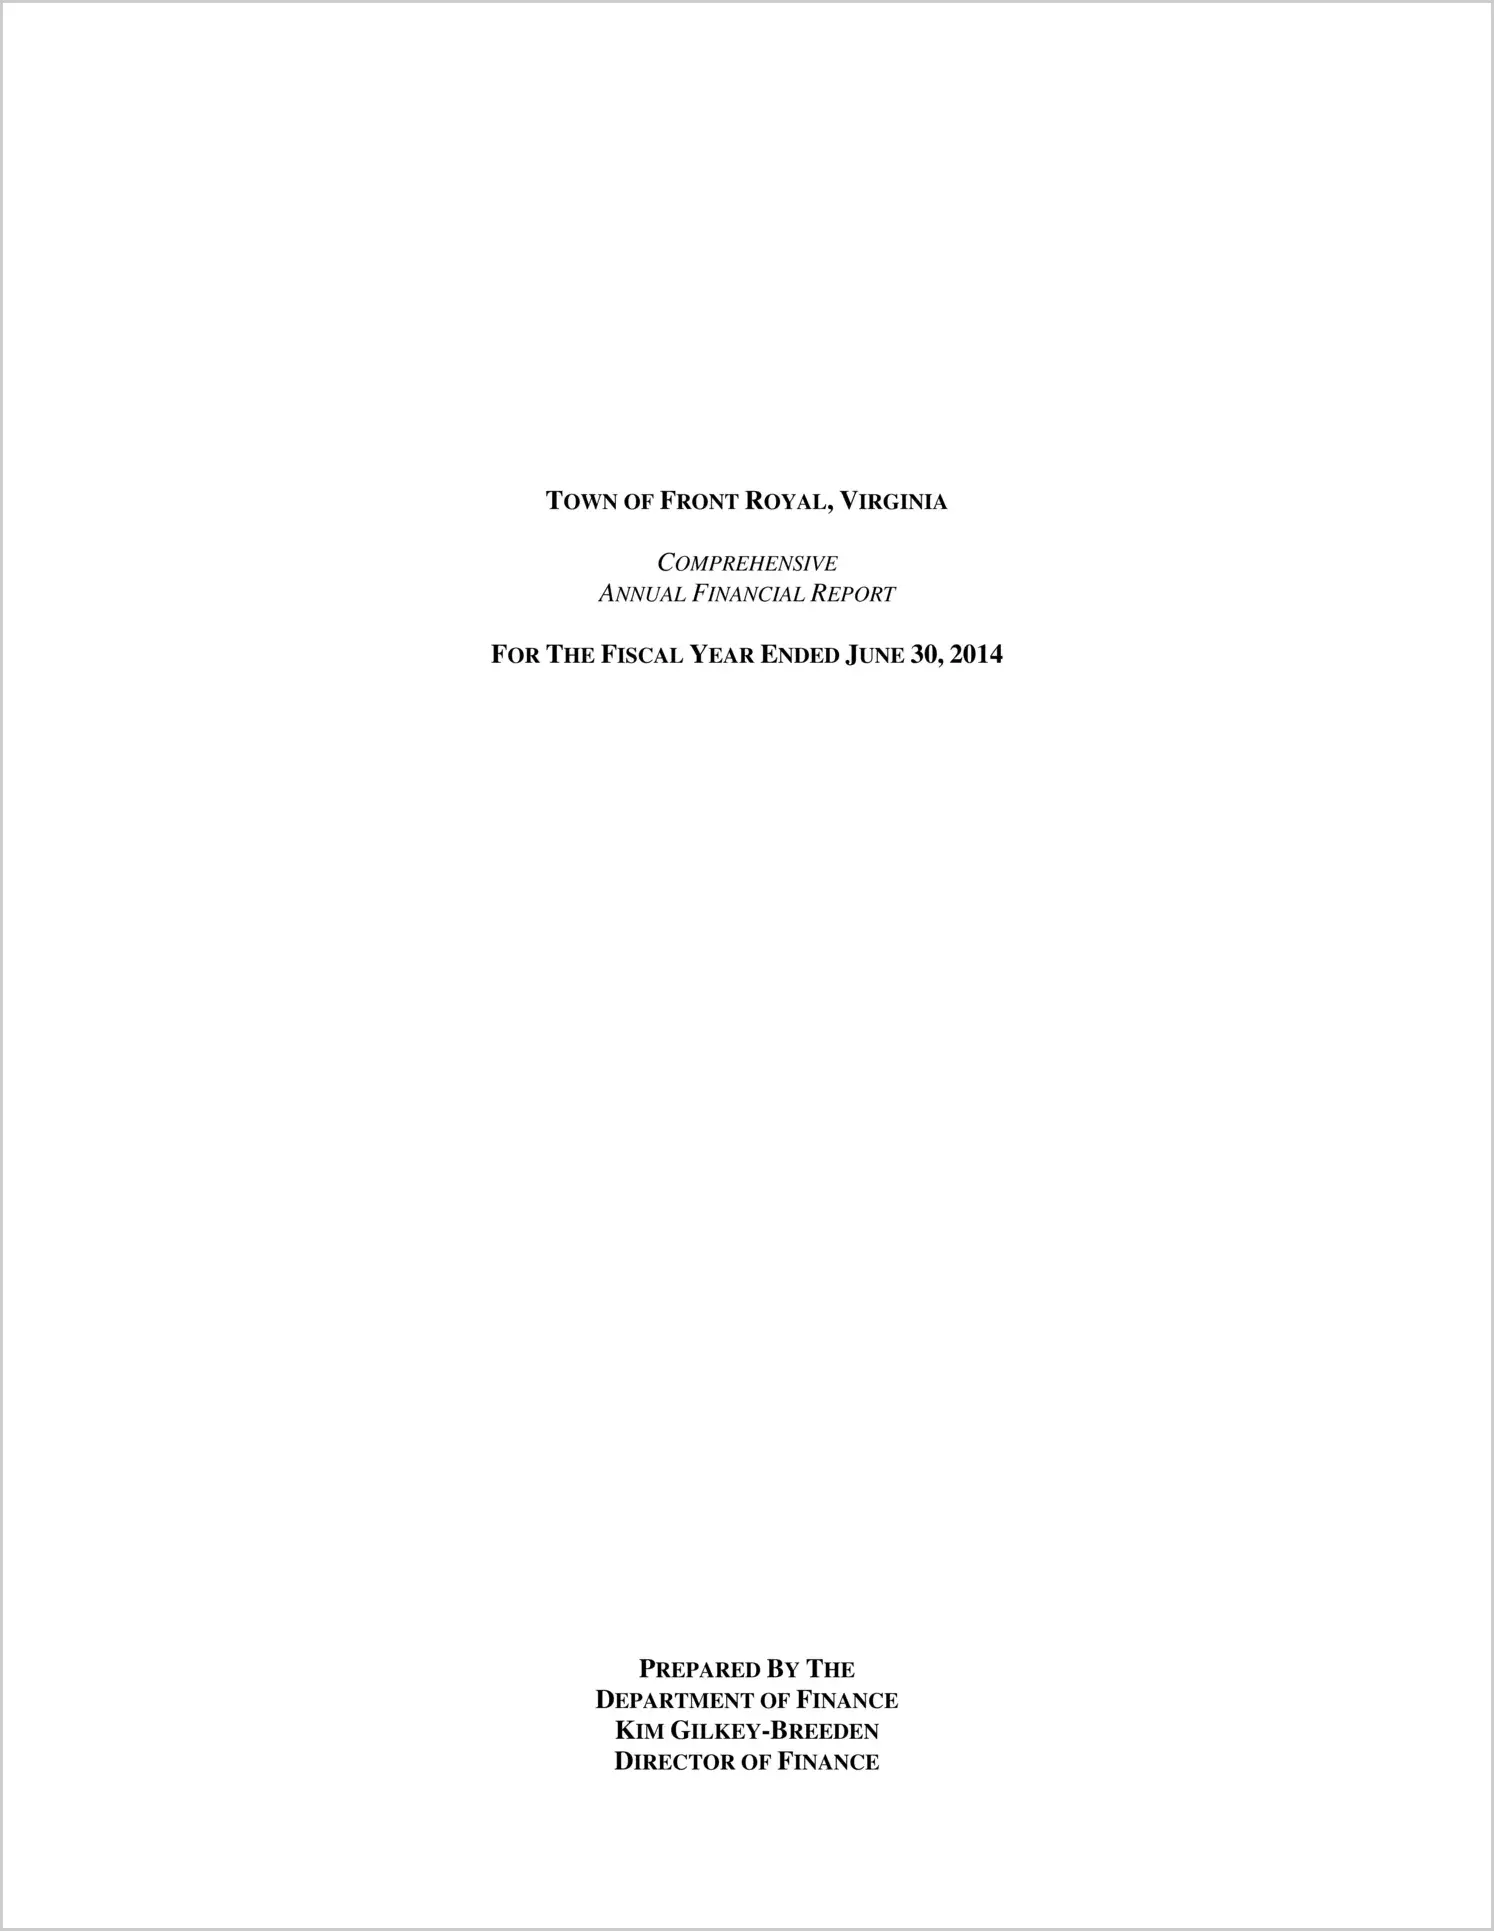 2014 Annual Financial Report for Town of Front Royal